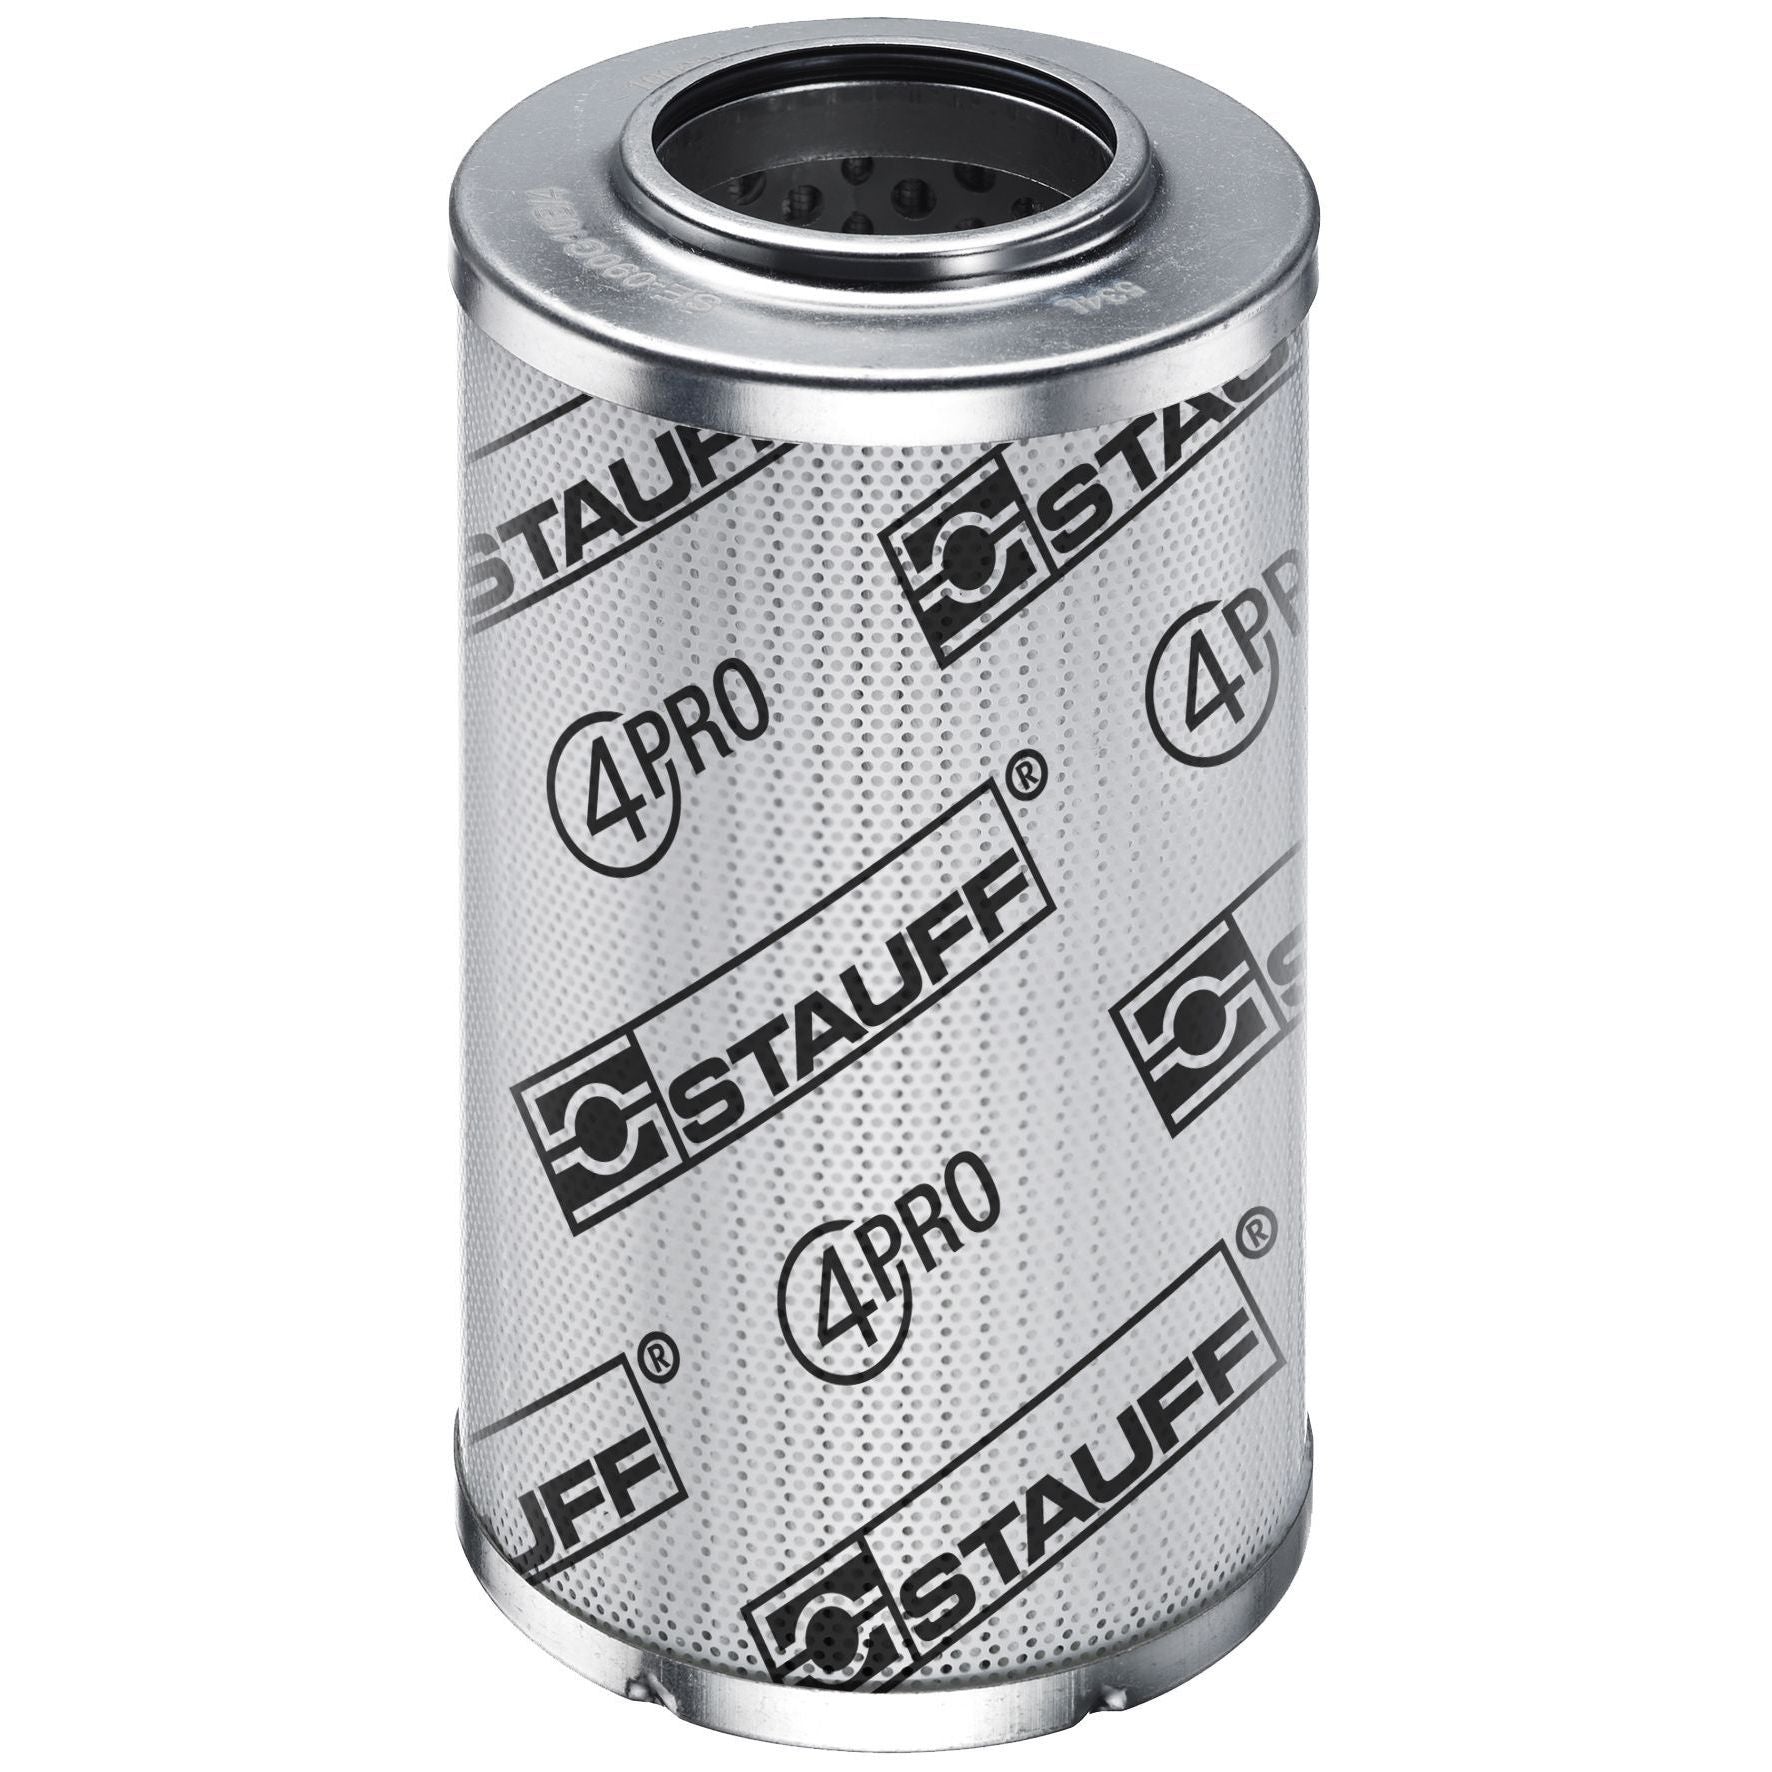 SE-030-S-100-B/3 : Stauff SF-030 Series Filter Element, 100 Micron, Stainless Mesh Media, 3045psi Collapse Differential, Buna